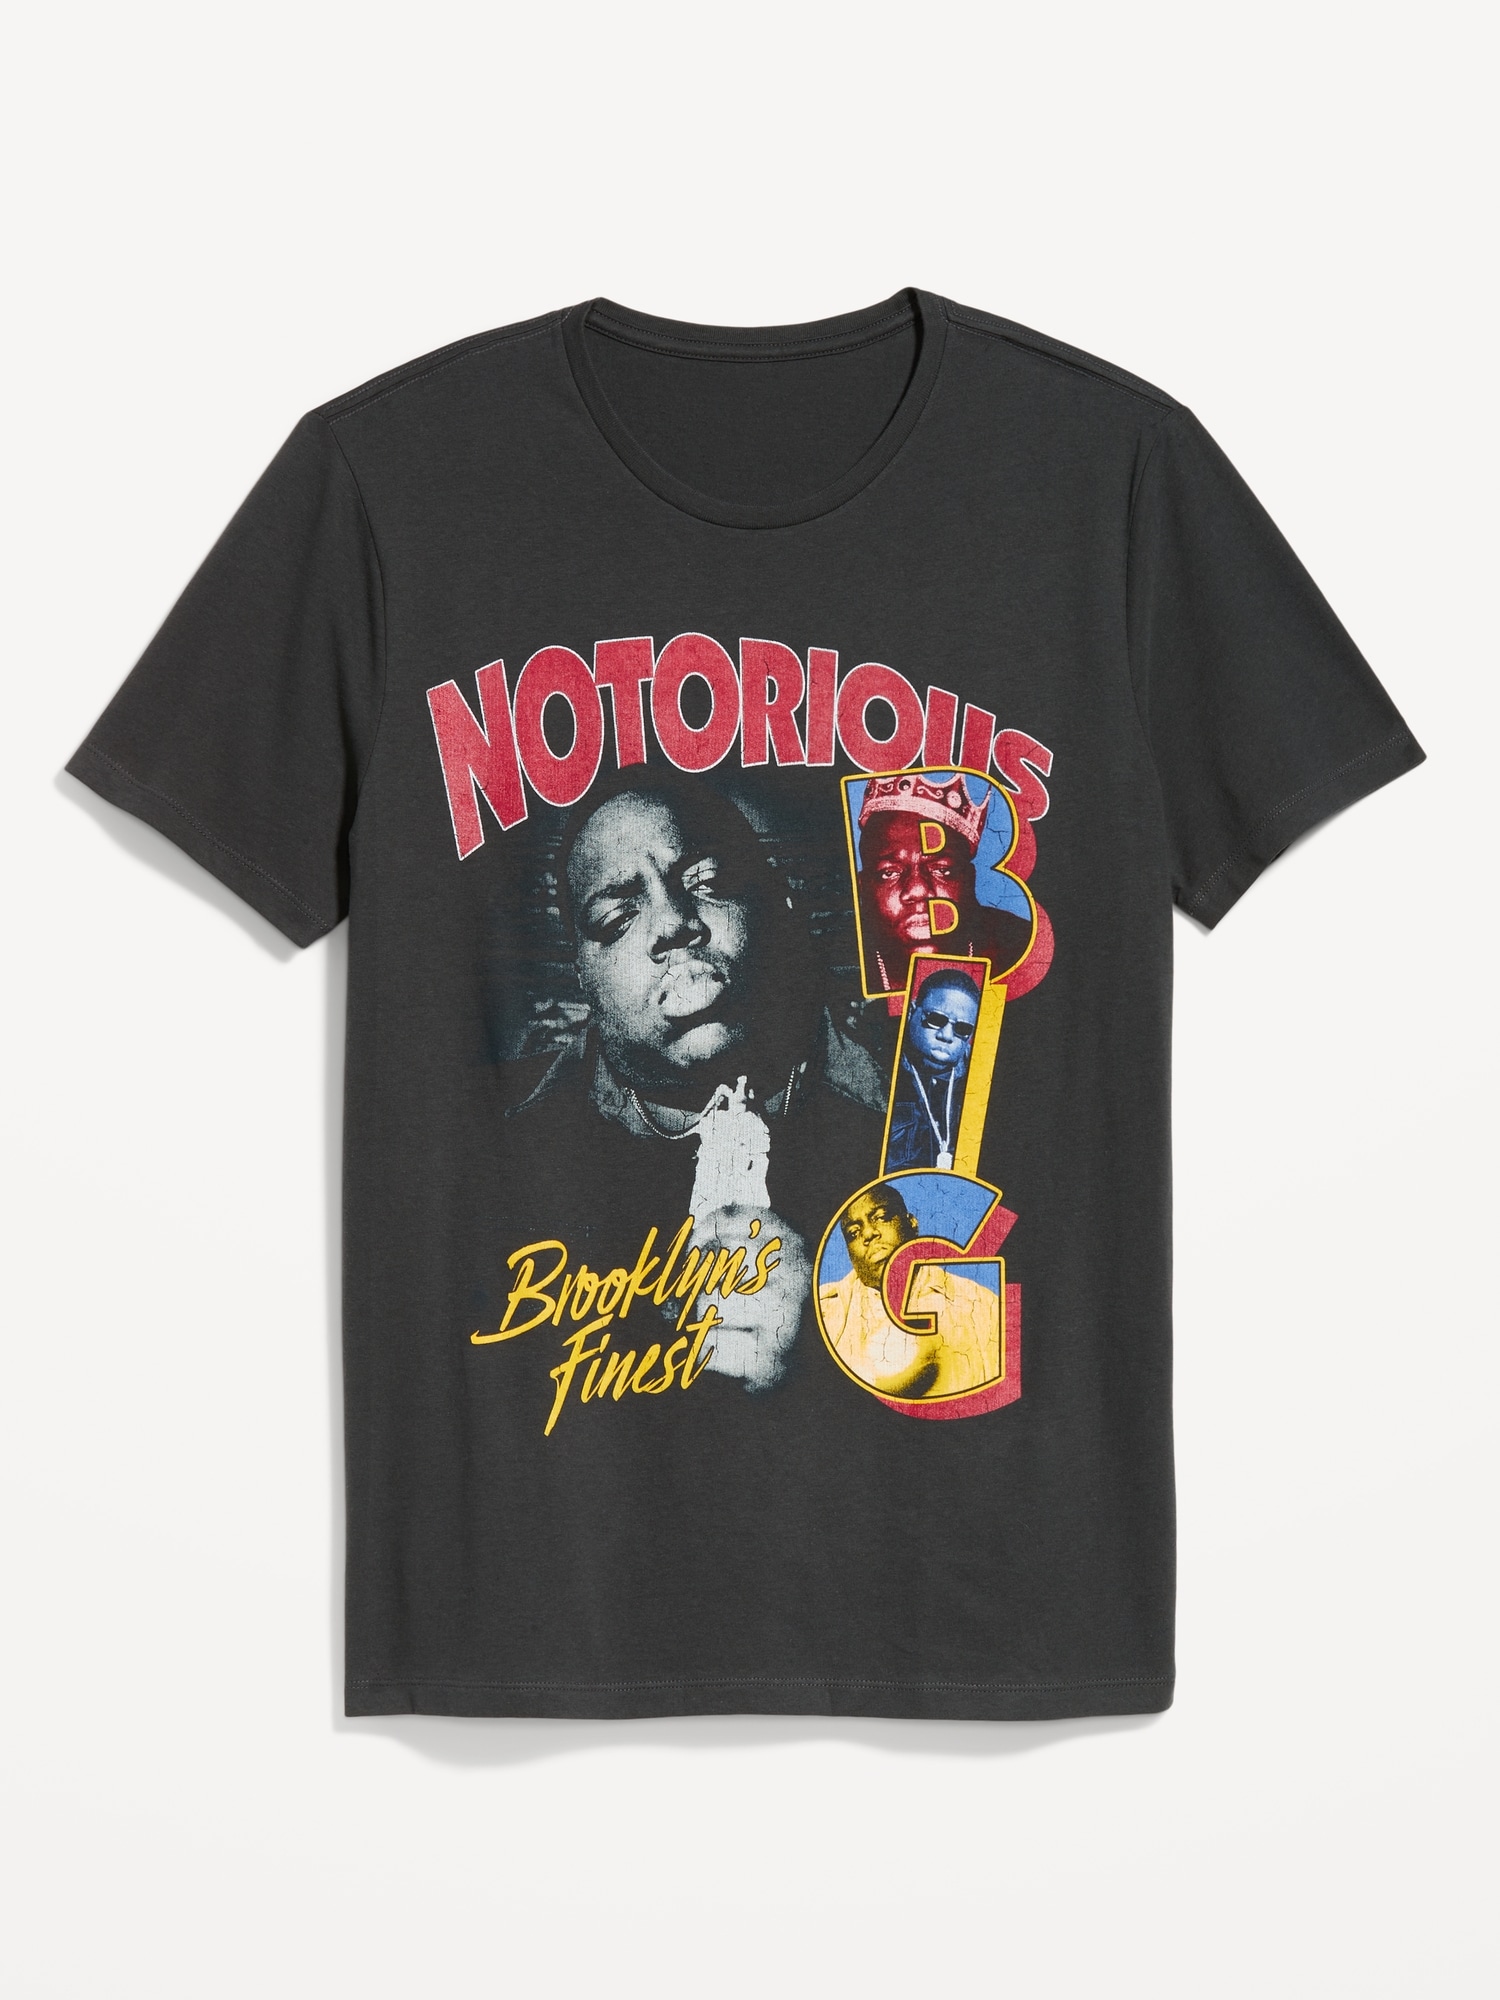 Notorious B.I.G. Biggie Smalls Gender-Neutral T-Shirt for Adults